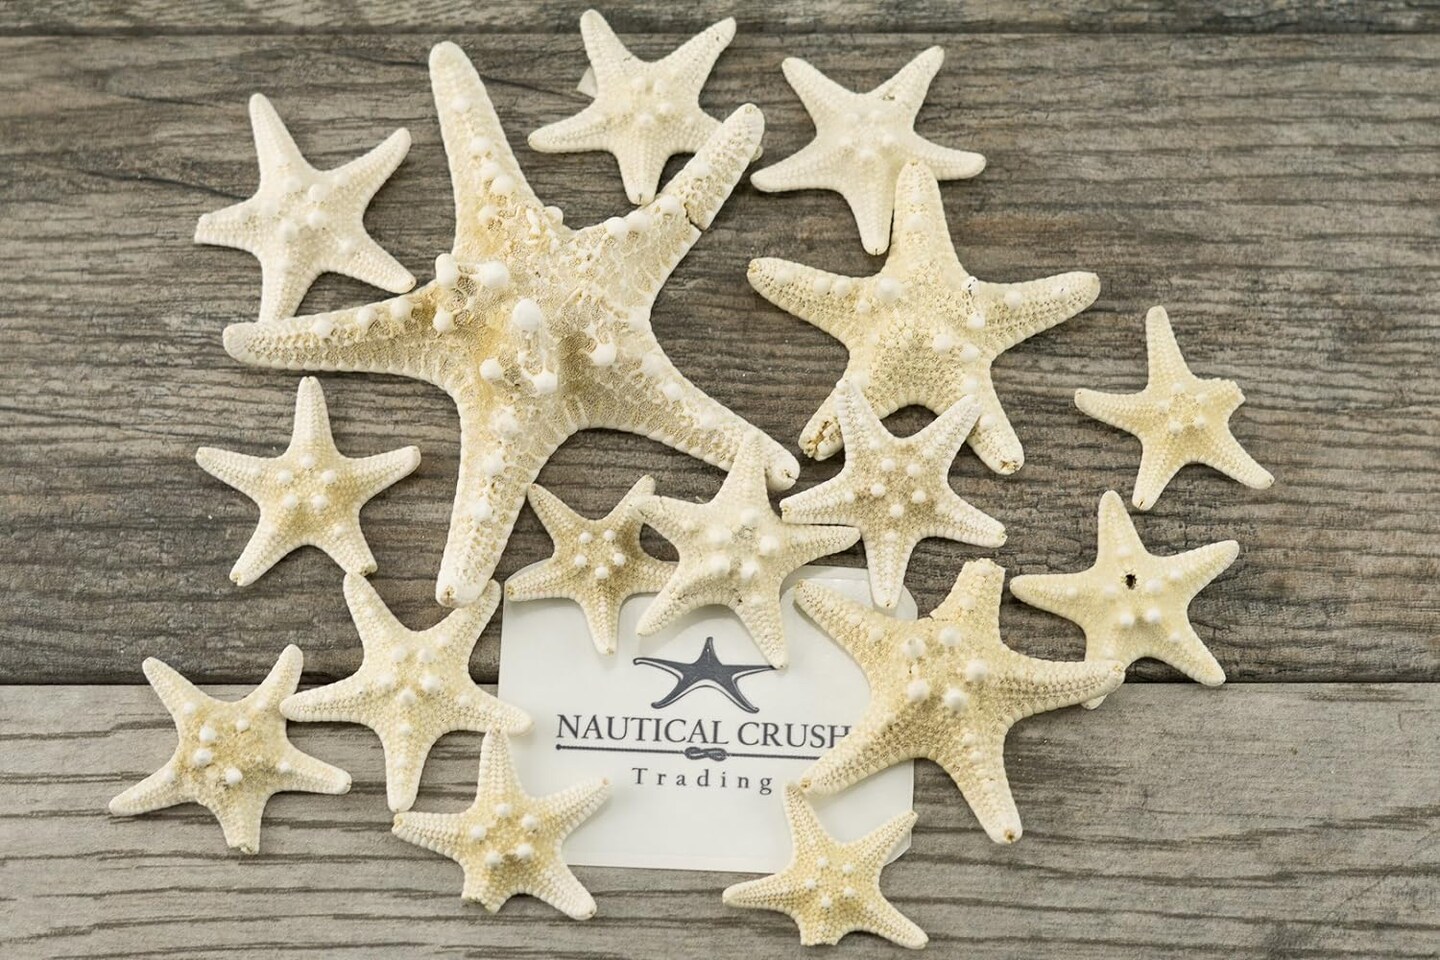 Starfish 10 Pack Green & Blue Assorted Star Fish 4-6 Inch Starfish for  Crafts and Decor